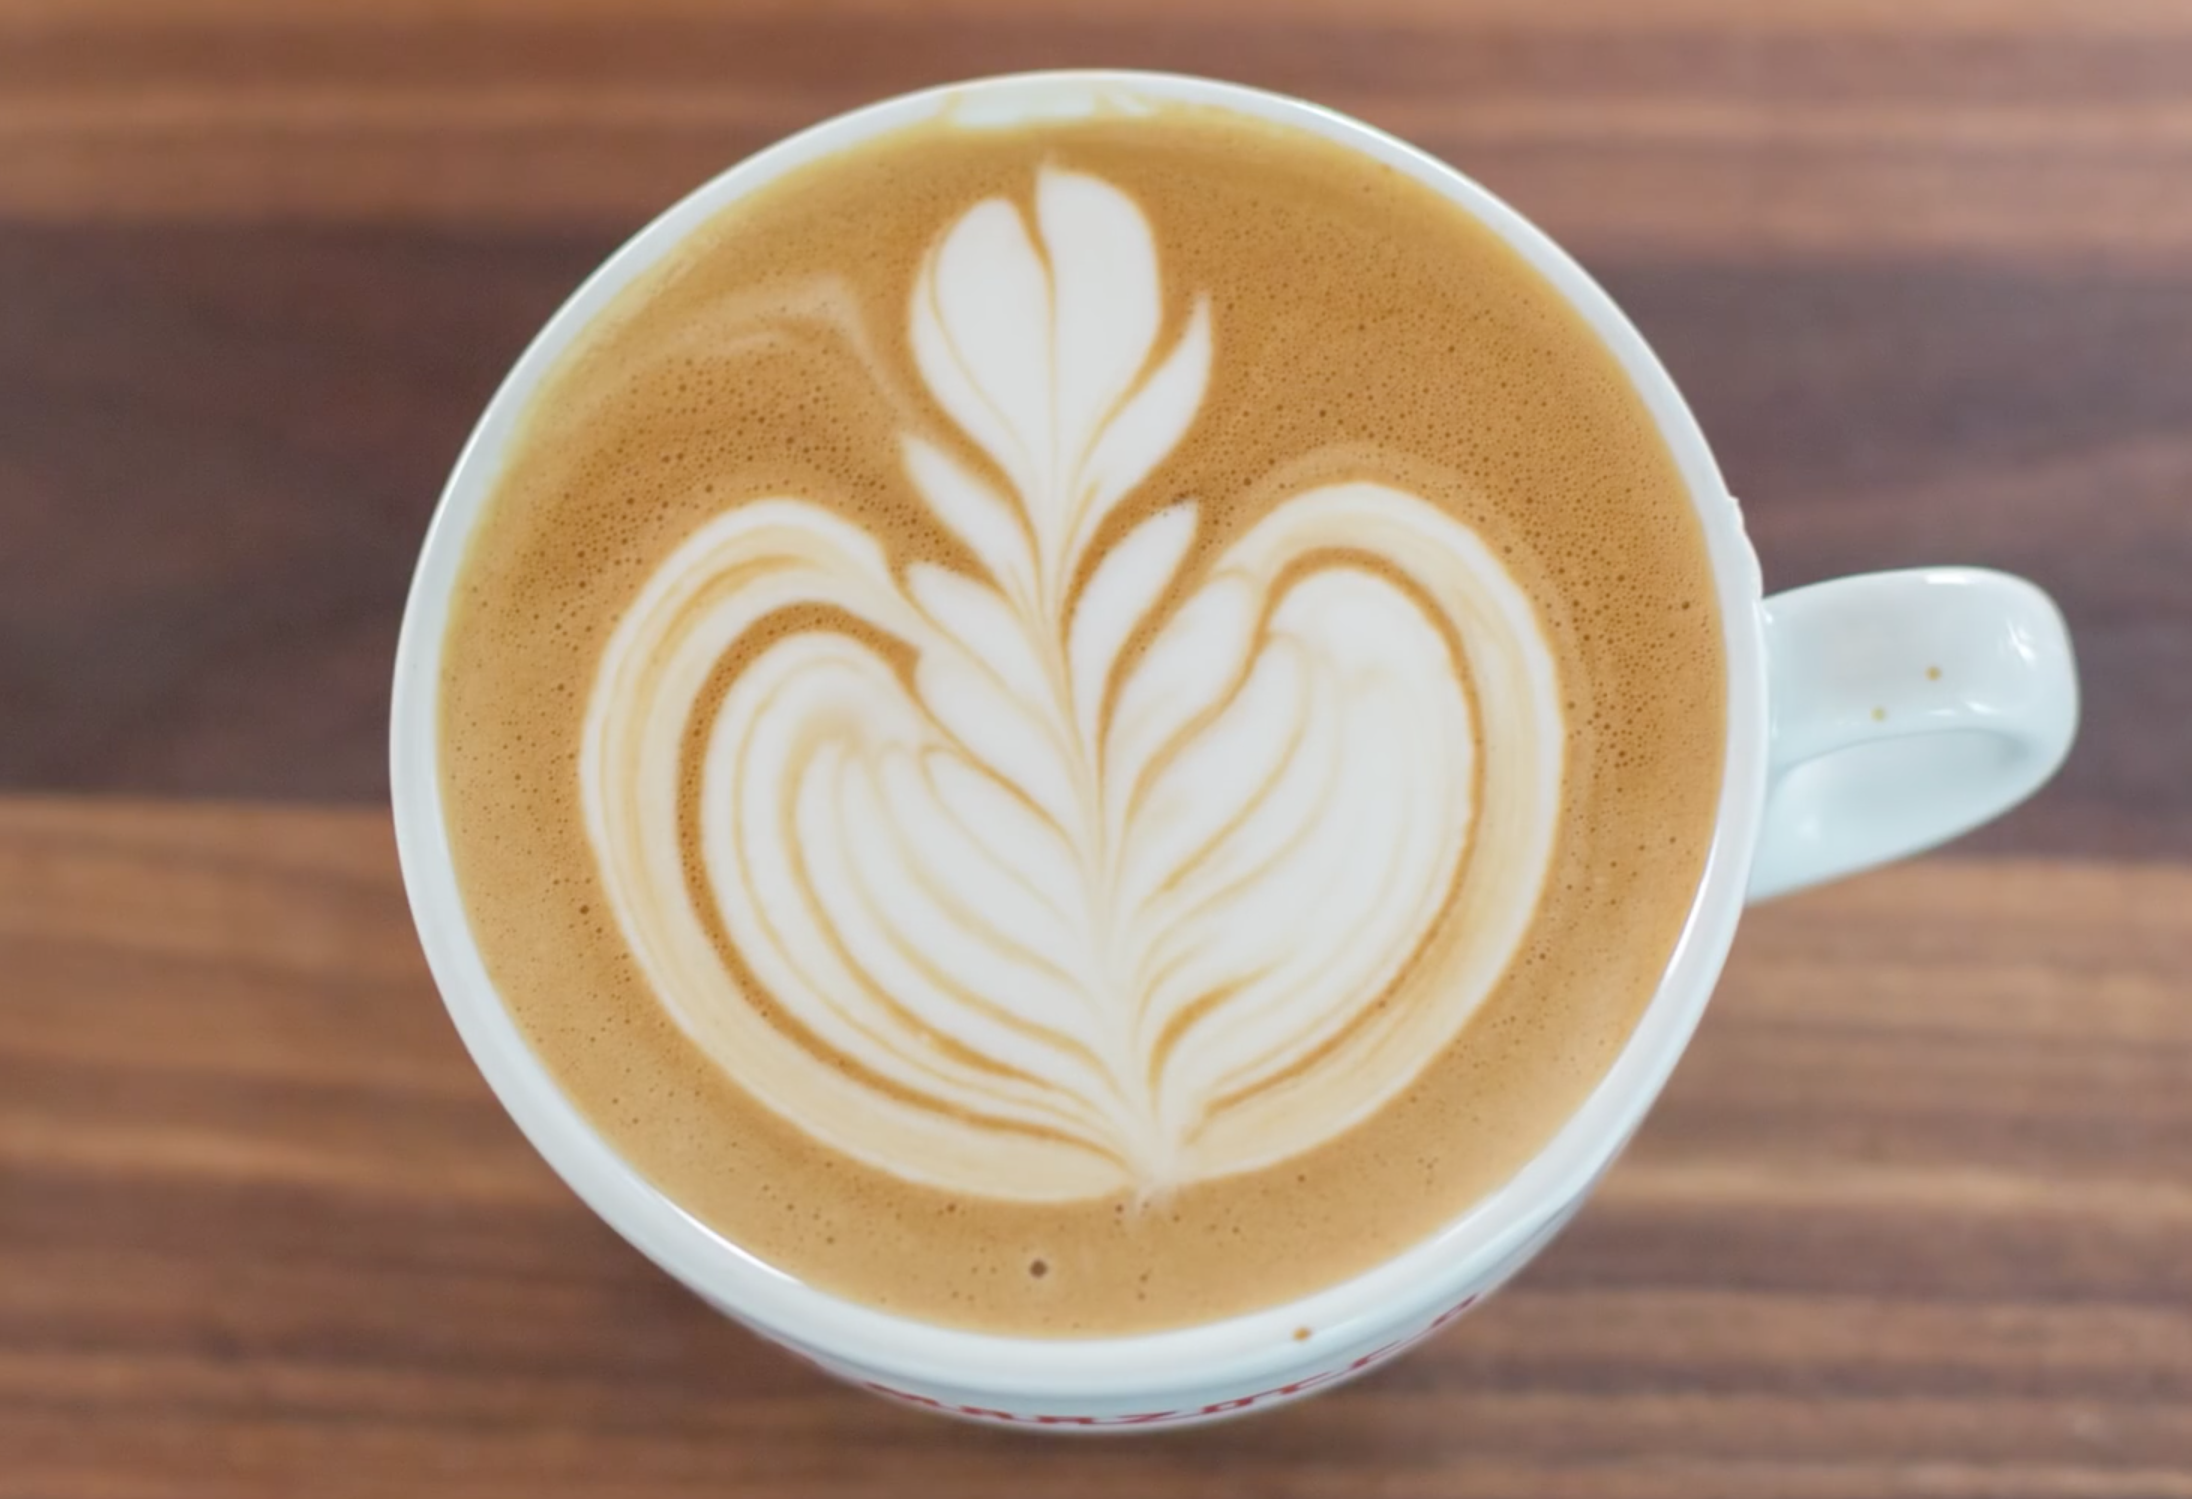 How to Master the Art of Steaming Milk for Perfect Lattes